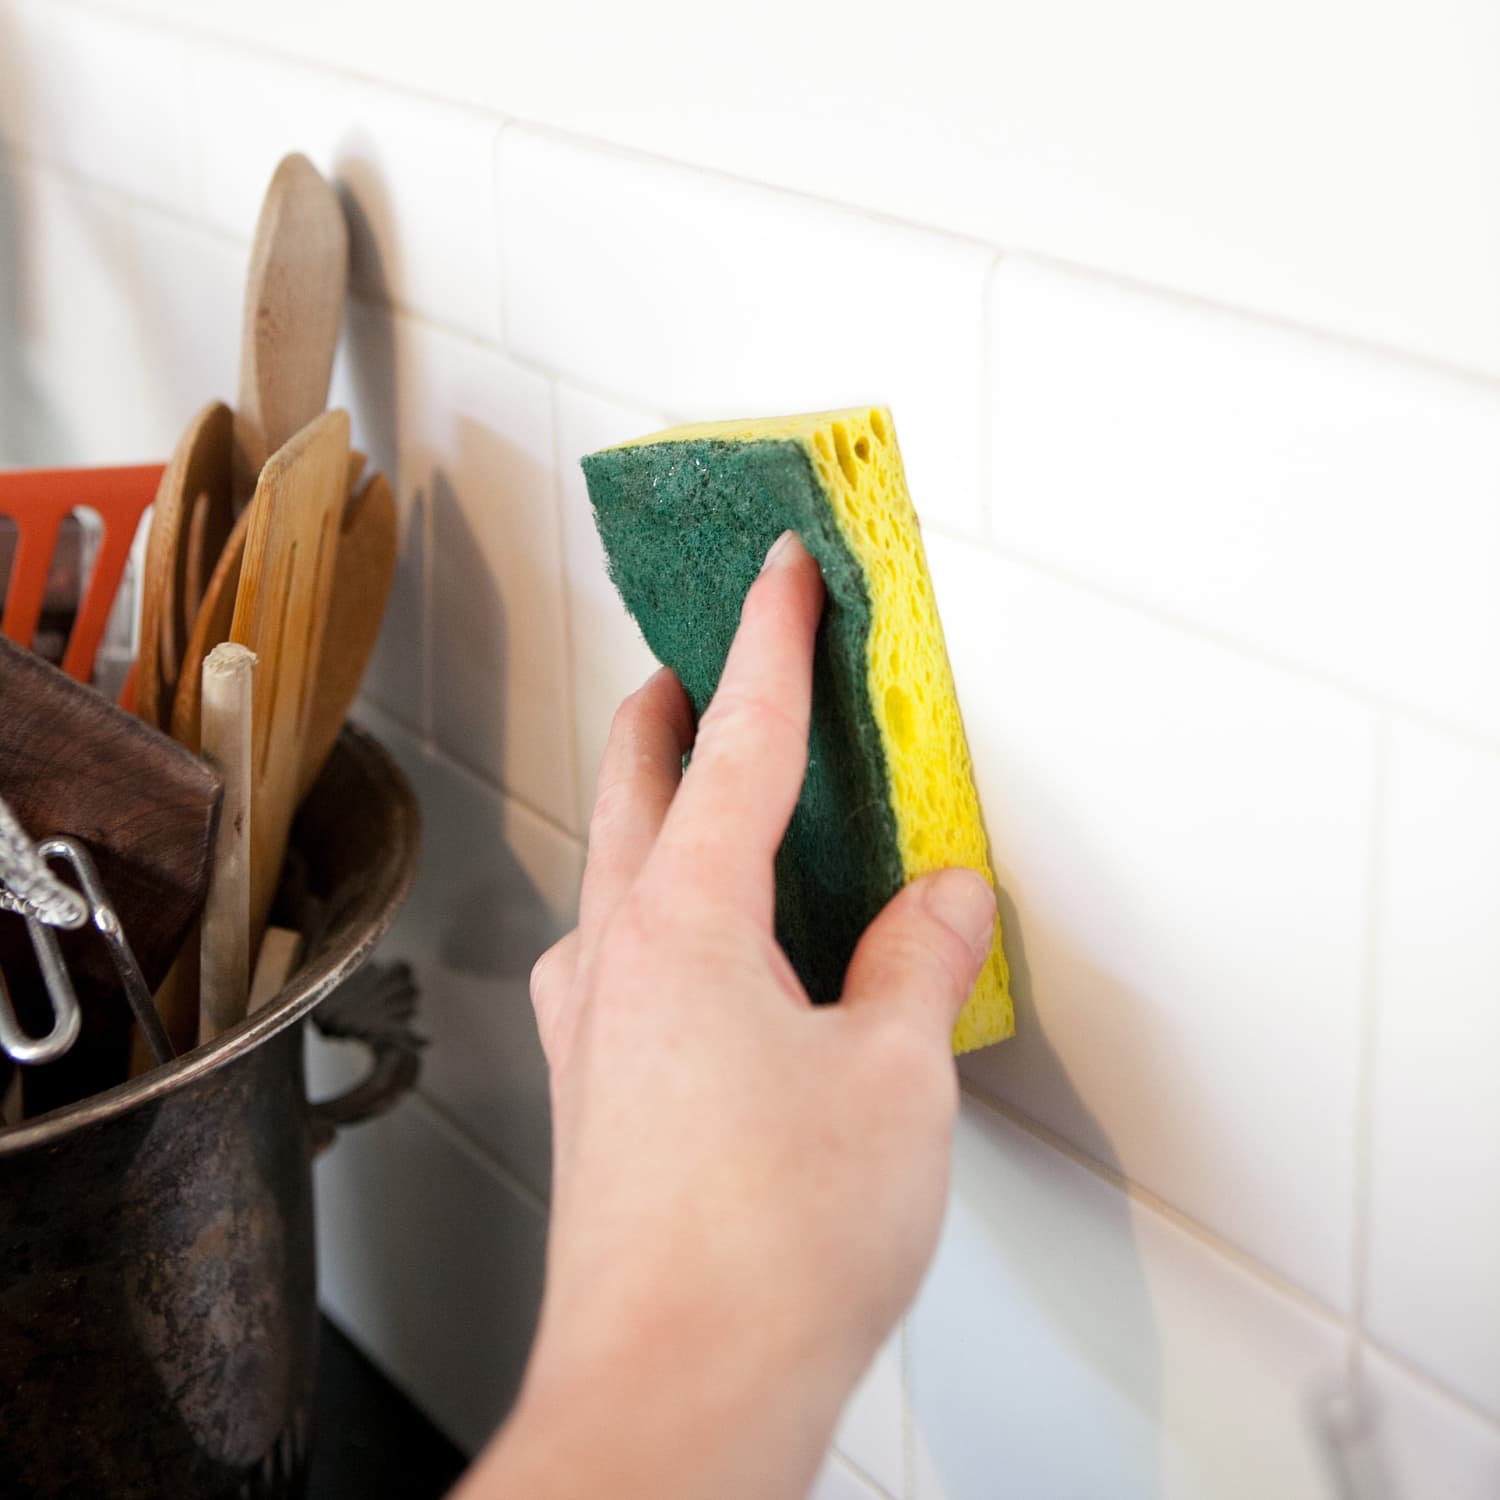 How To Clean Greasy Walls Backsplashes And Cabinets Kitchn